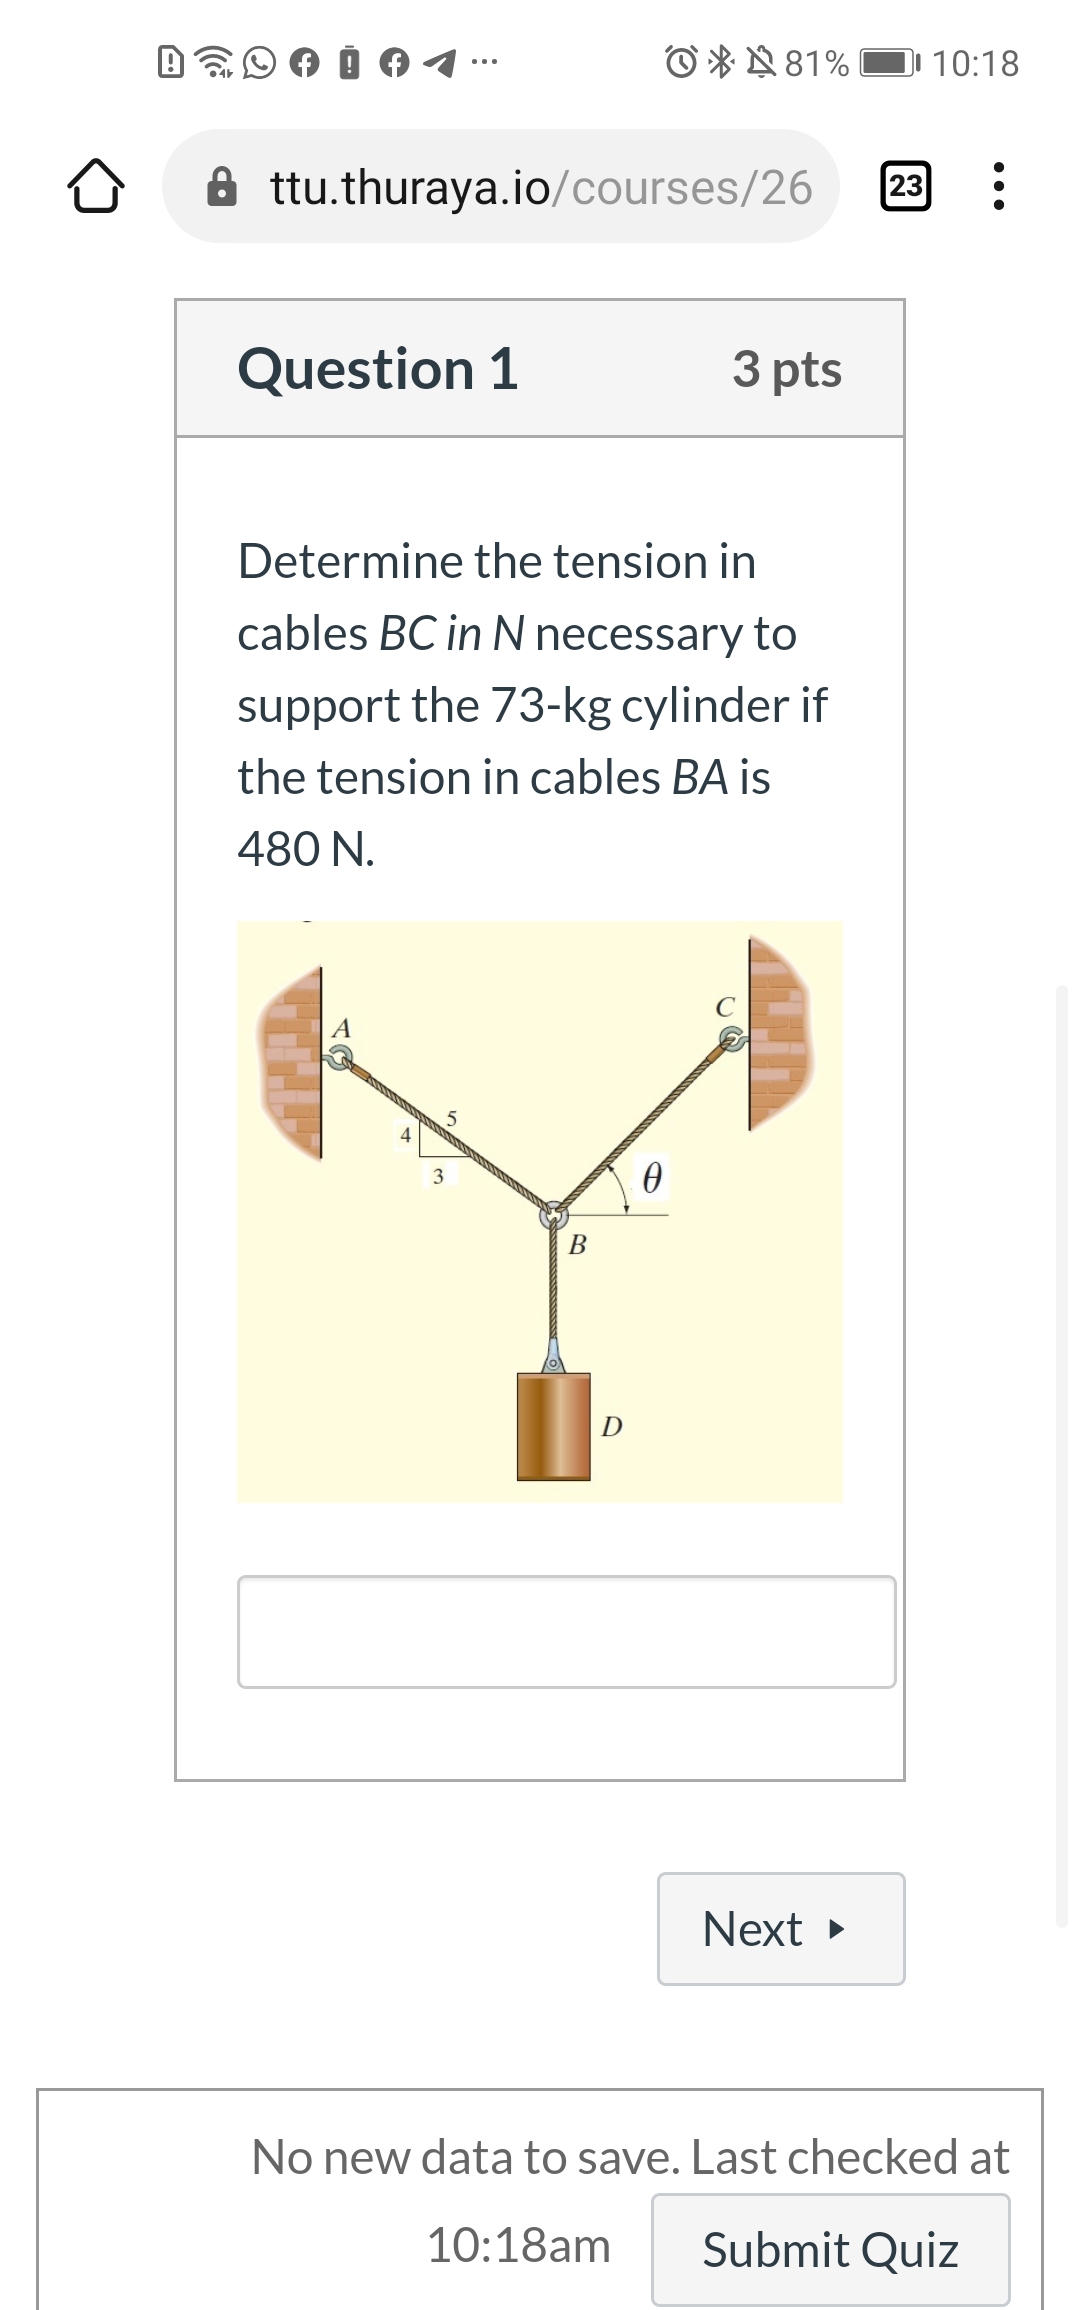 O * N81%
10:18
23
A ttu.thuraya.io/courses/26
Question 1
3 pts
Determine the tension in
cables BC in N necessary to
support the 73-kg cylinder if
the tension in cables BA is
480 N.
5
4
3
В
D
Next
No new data to save. Last checked at
10:18am
Submit Quiz
